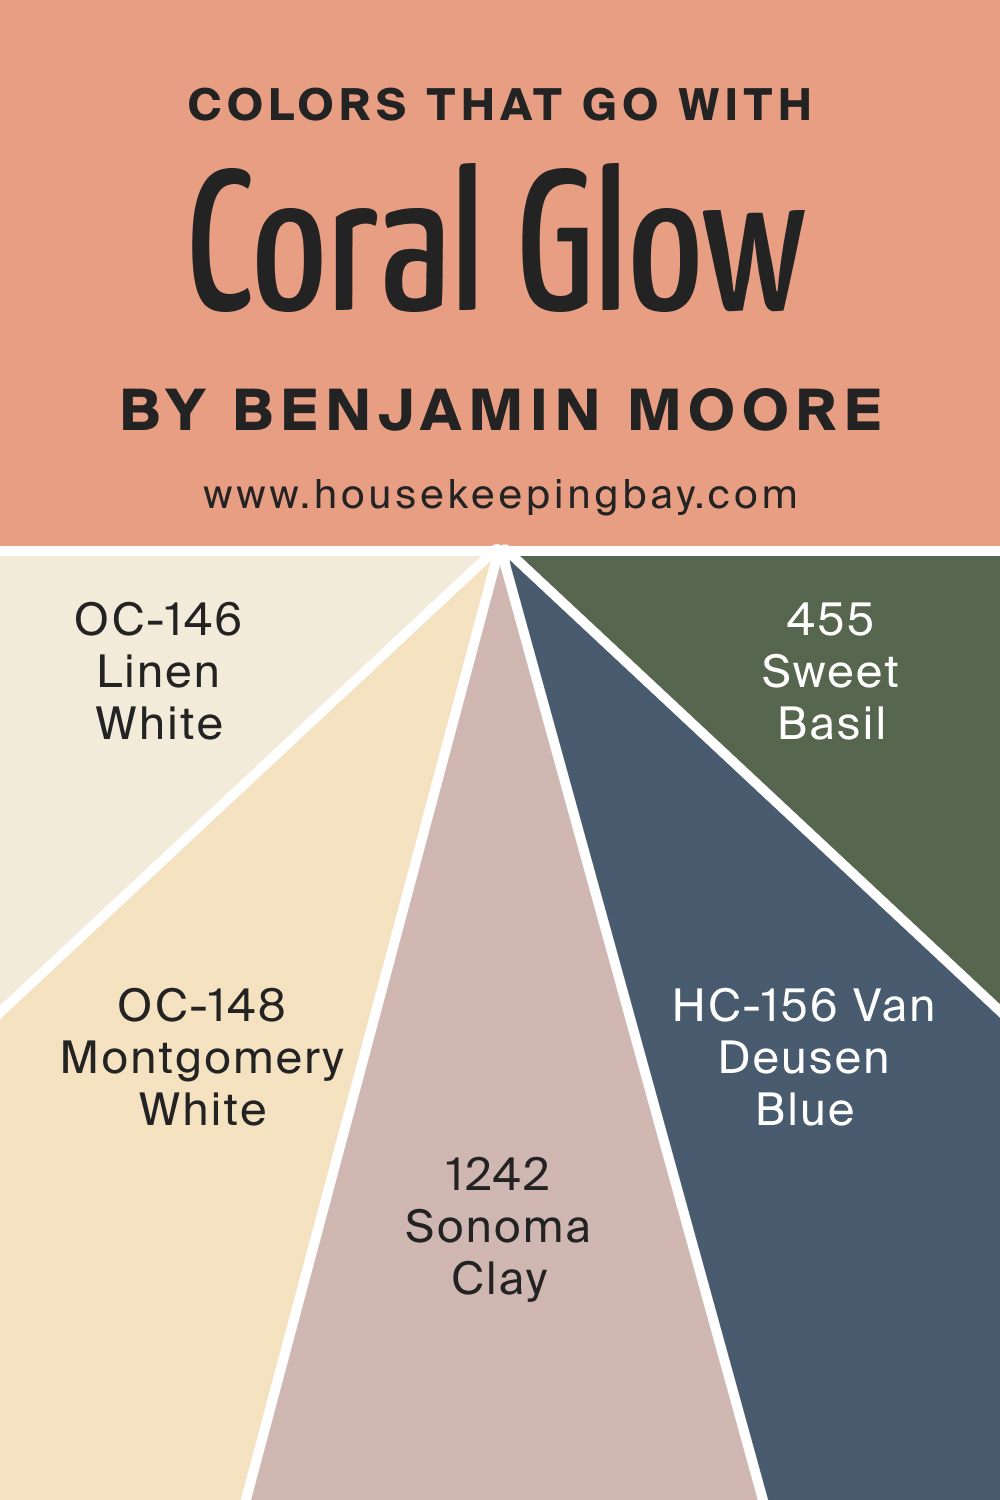 Colors that goes with Coral Glow 026 by Benjamin Moore